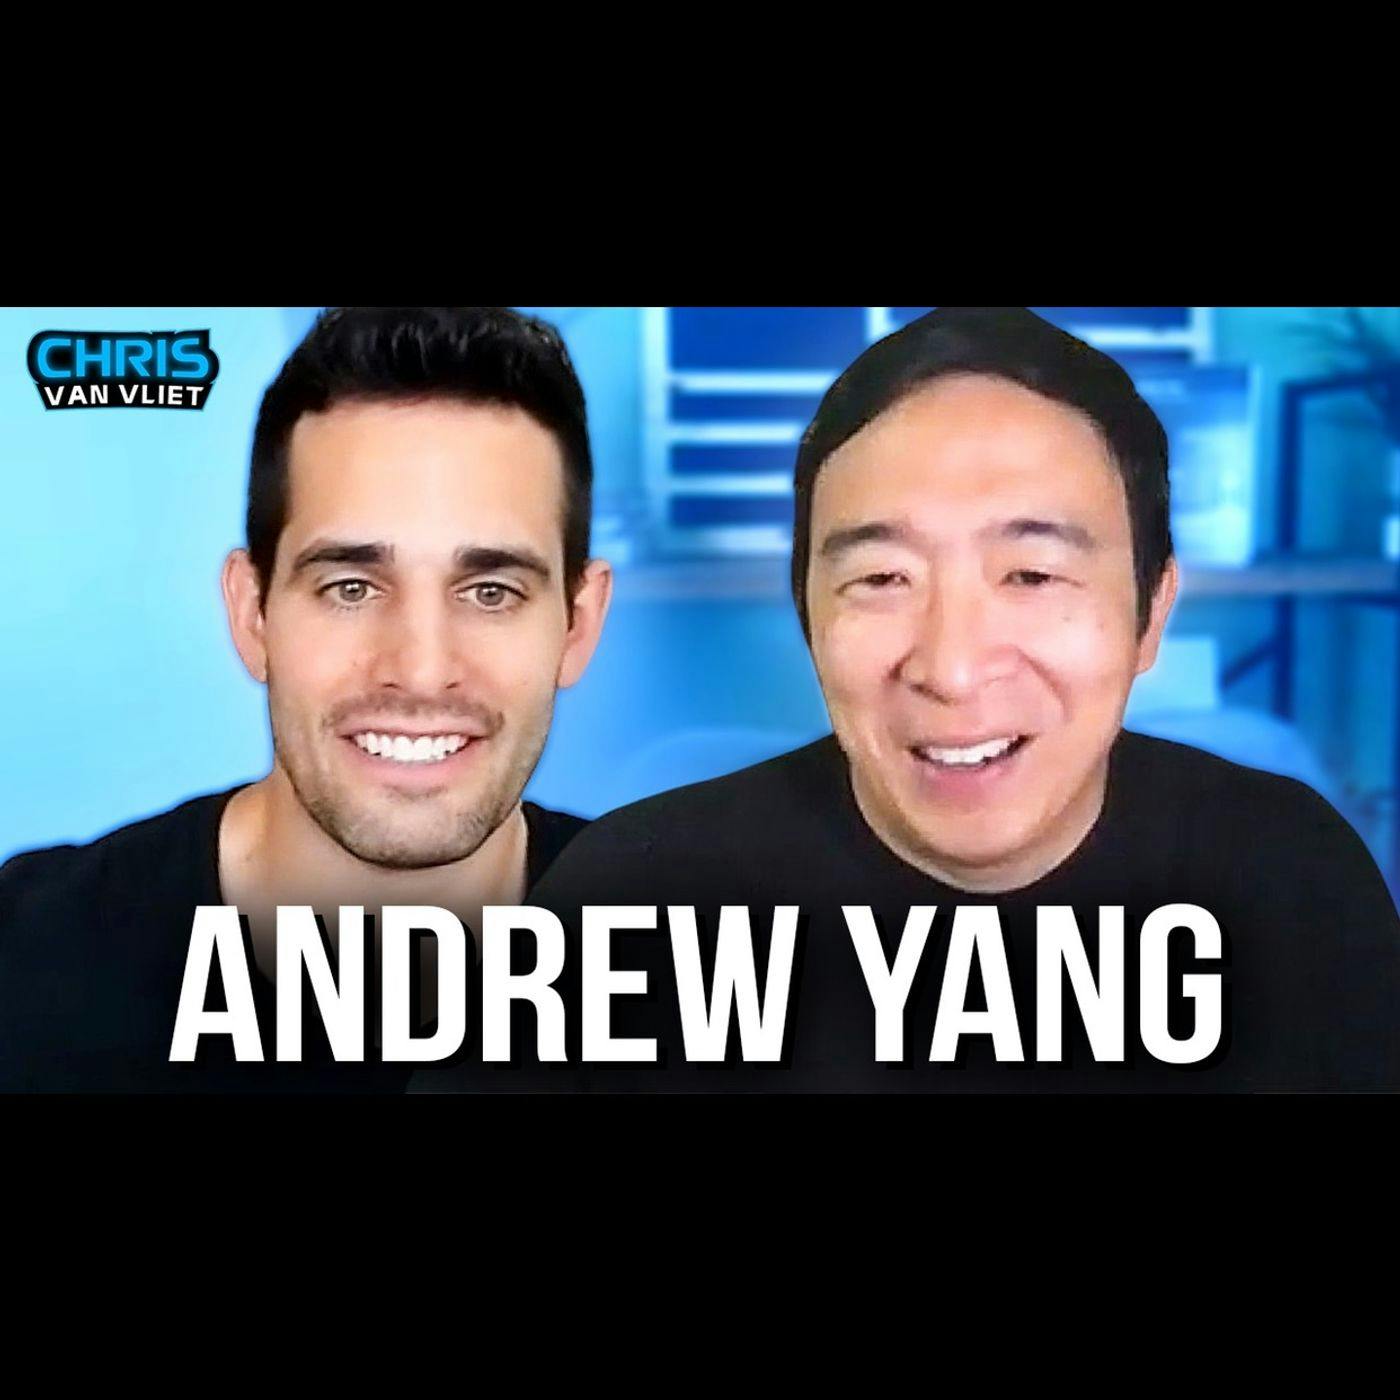 Andrew Yang on WWE's "plain F-ing greed", Vince McMahon, favorite wrestling match, AEW